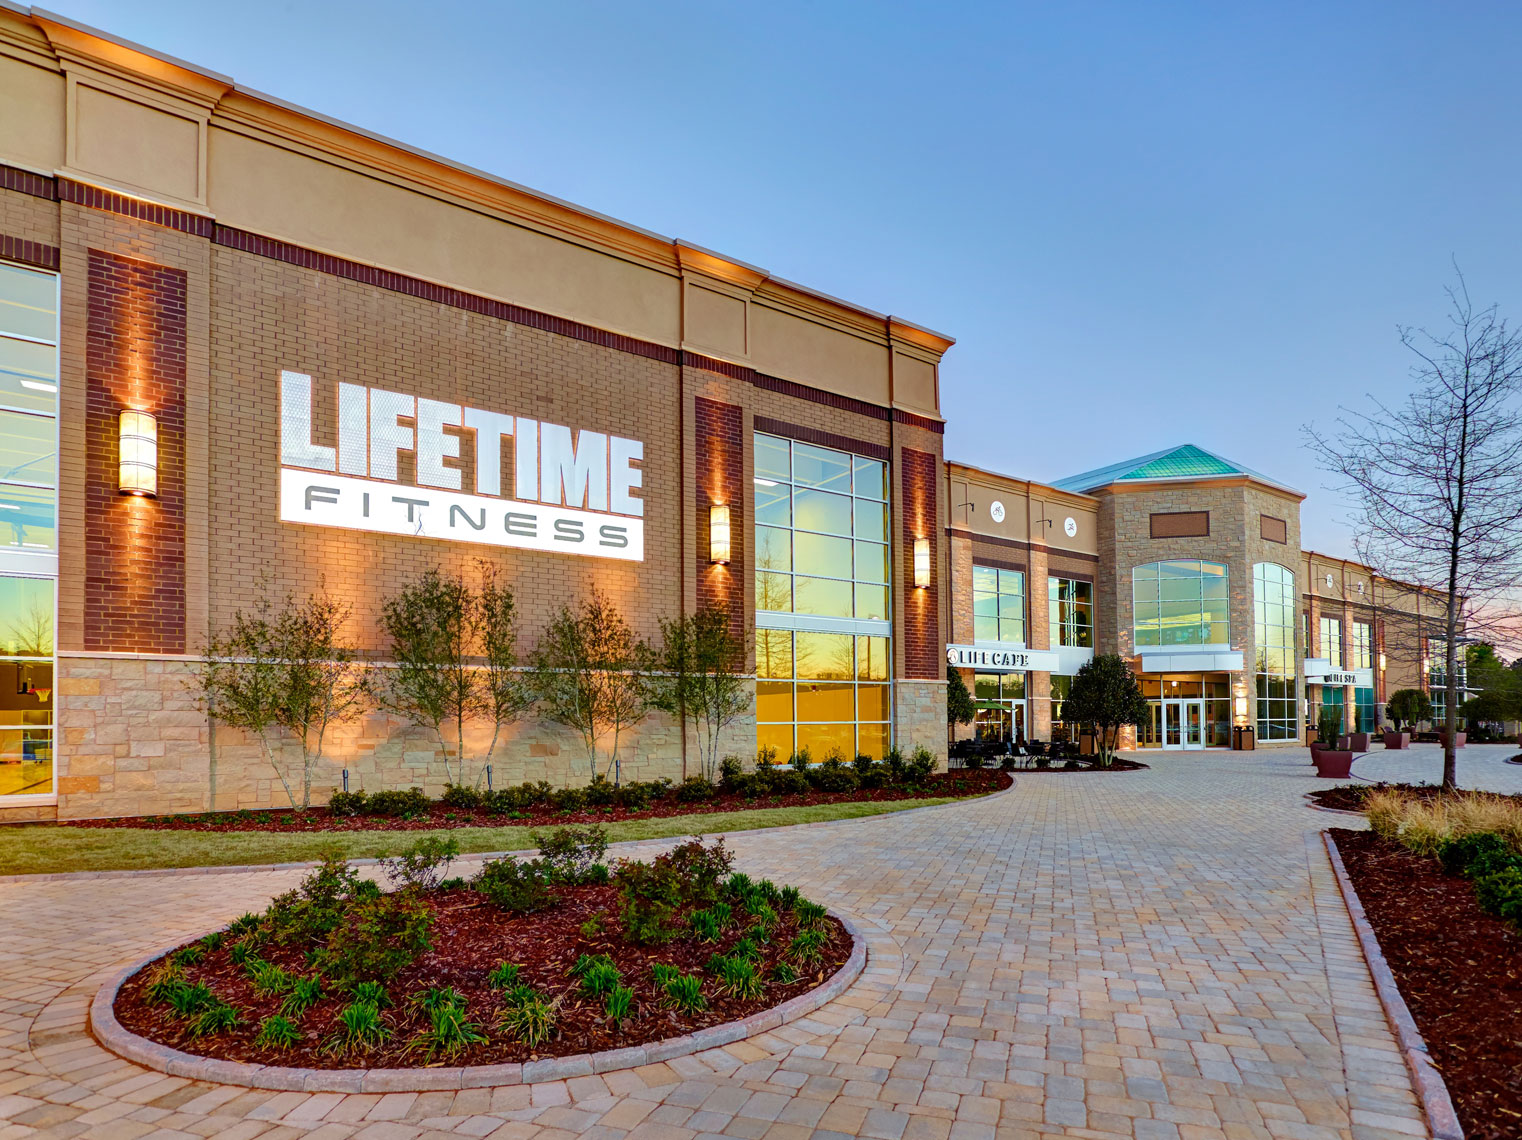 LifeTime Fitness/ext./dusk/architectural photography